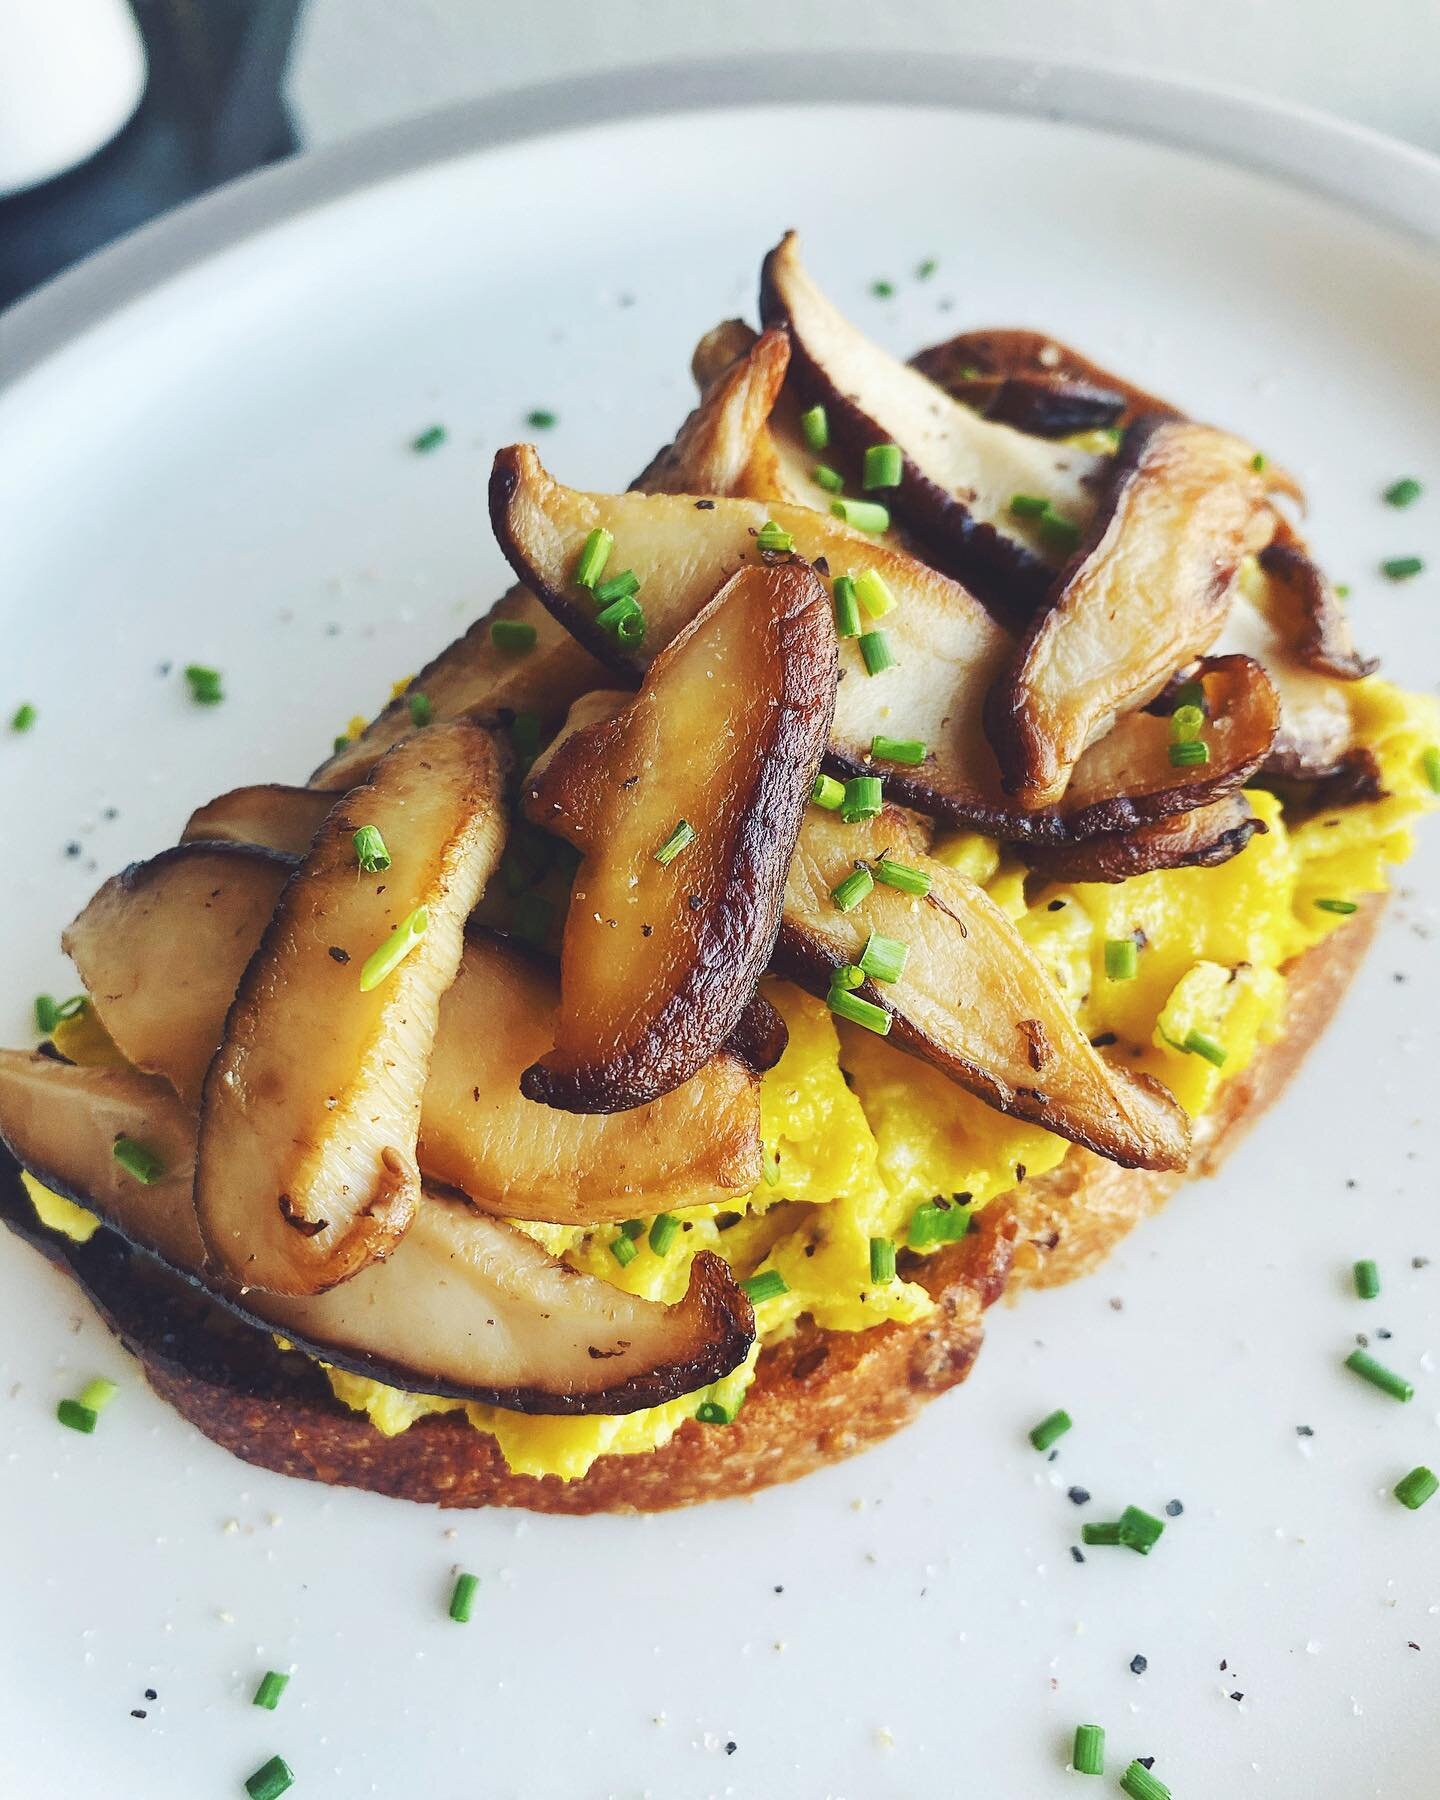 Truffle butter! On sourdough toast with two soft scrambled eggs, saut&eacute;ed shiitake mushrooms and fresh chives.✨🍄 I bought the @epicureanbutter white truffle flavor from Whole Foods and it&rsquo;s so good. Such an easy and delicious way to make